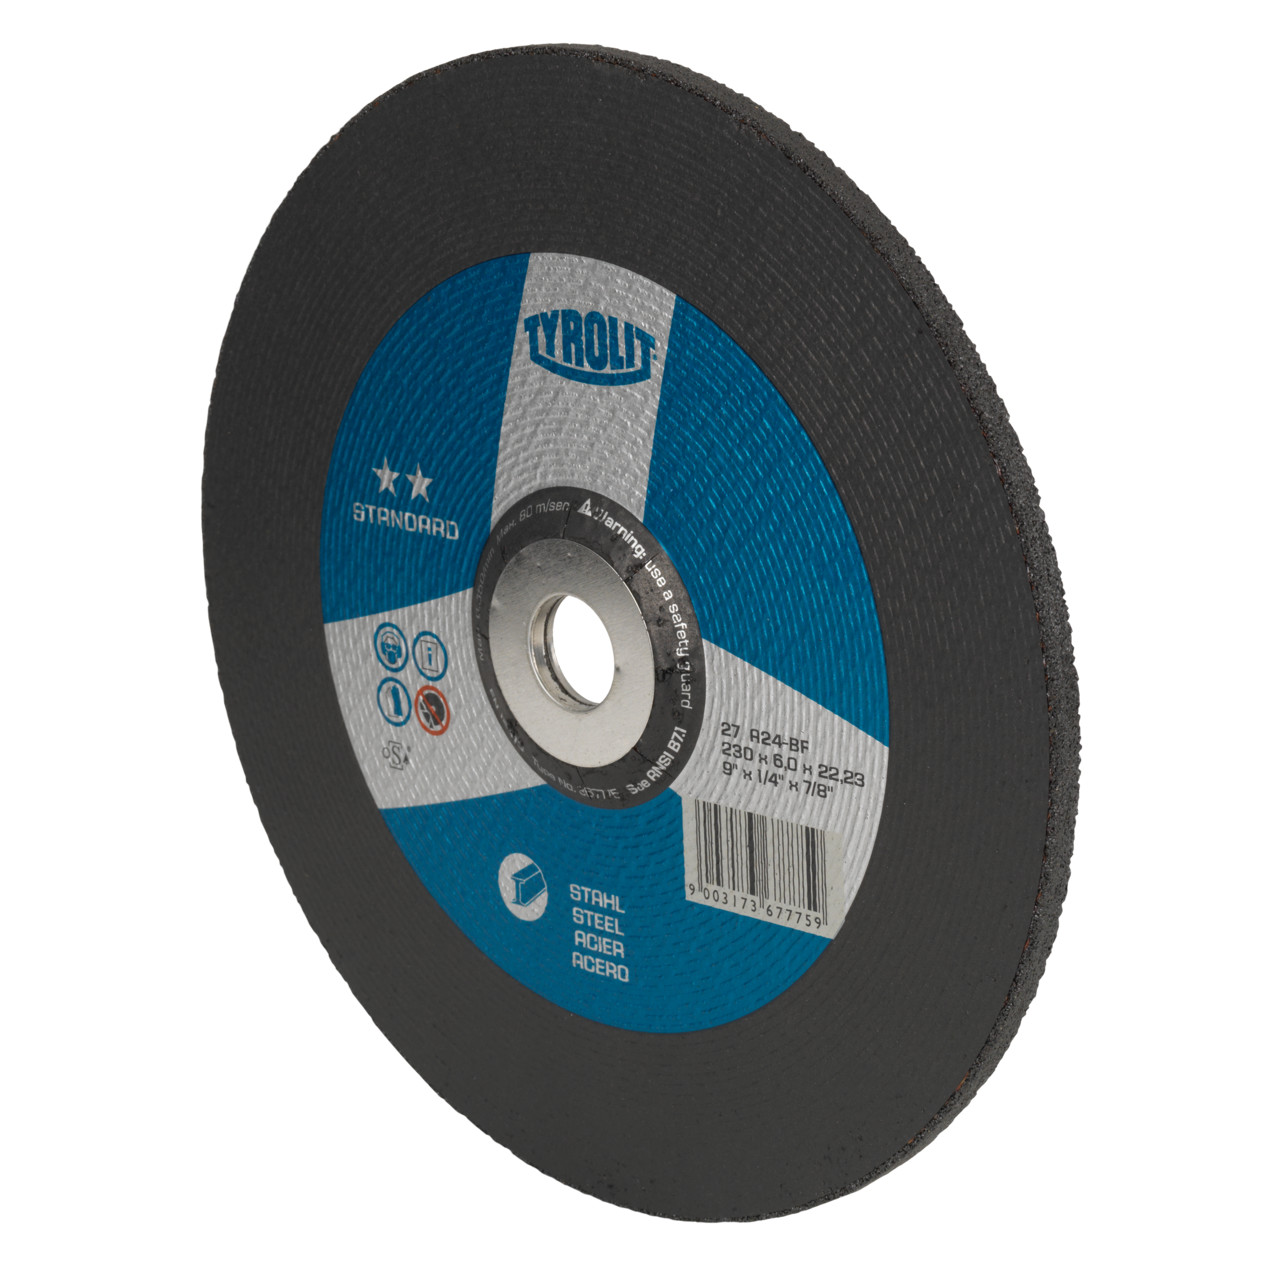 Tyrolit Roughing disc DxUxH 125x6x22.23 For steel, shape: 27 - offset version, Art. 367771